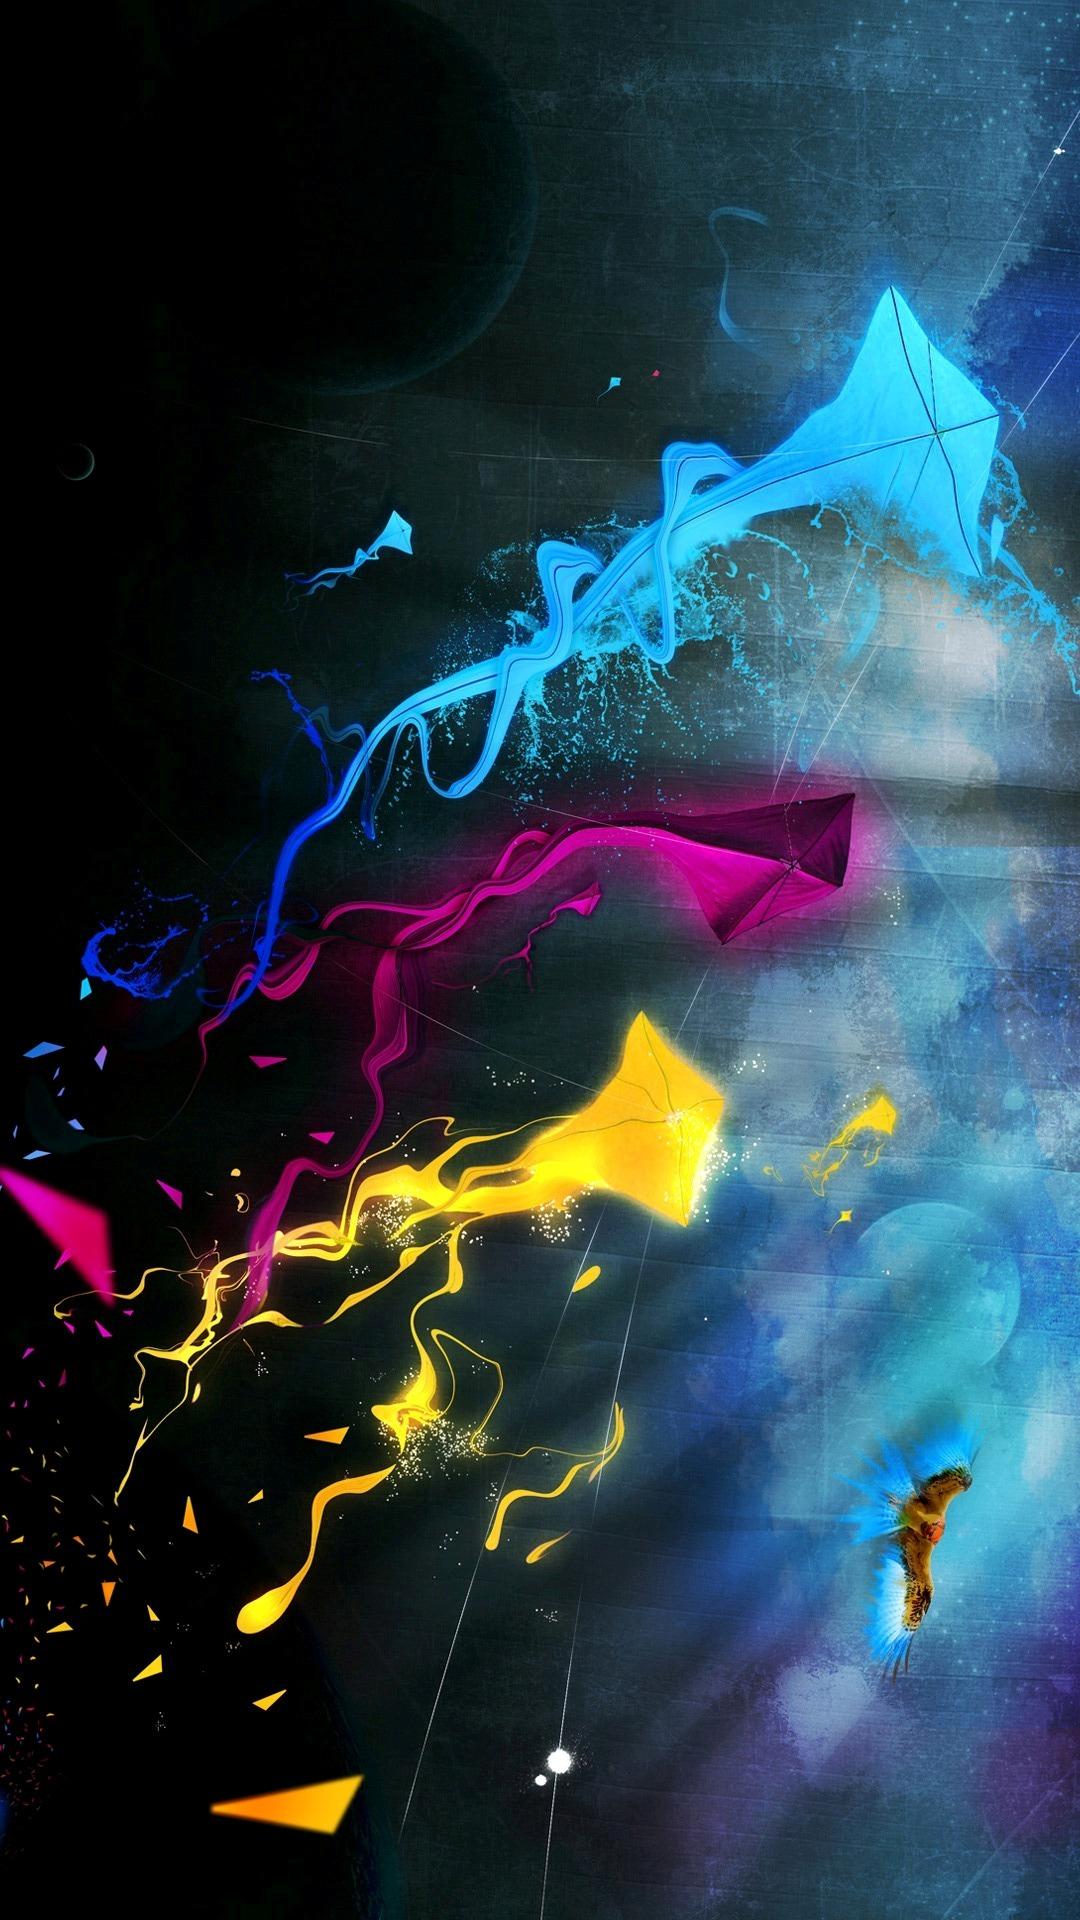 48+] Cool Wallpapers for Mobile